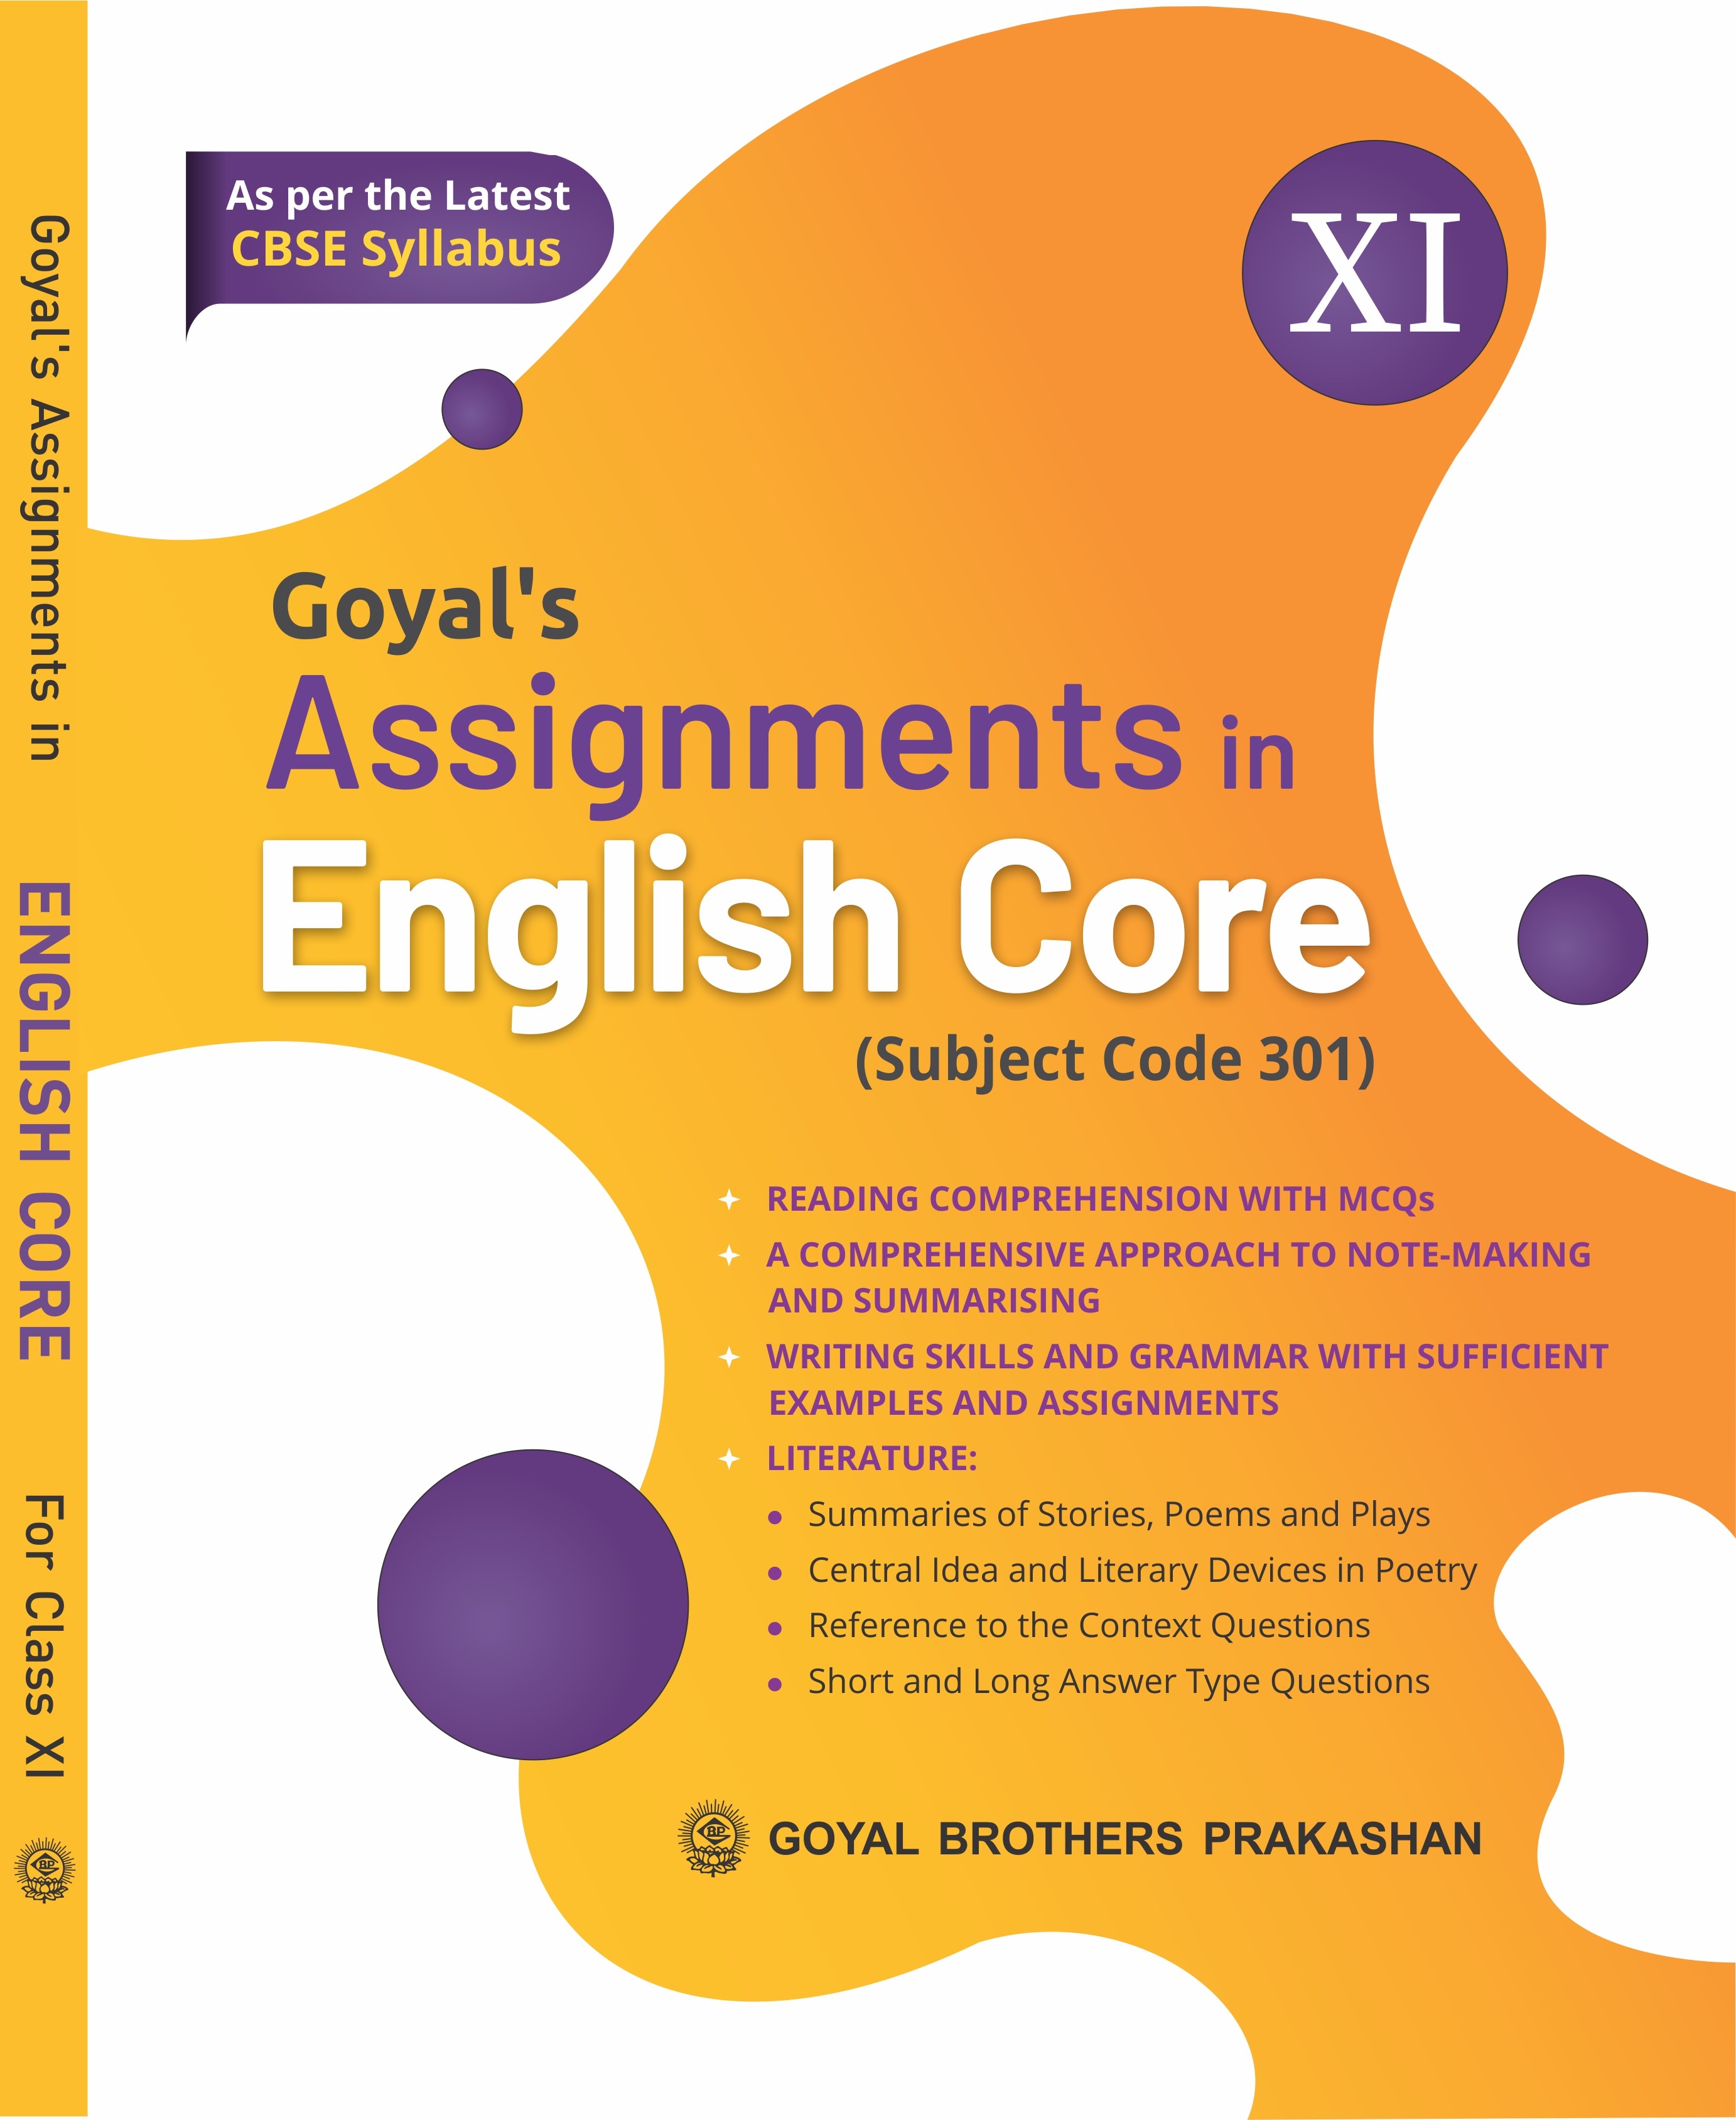 goyal assignment in english language and literature